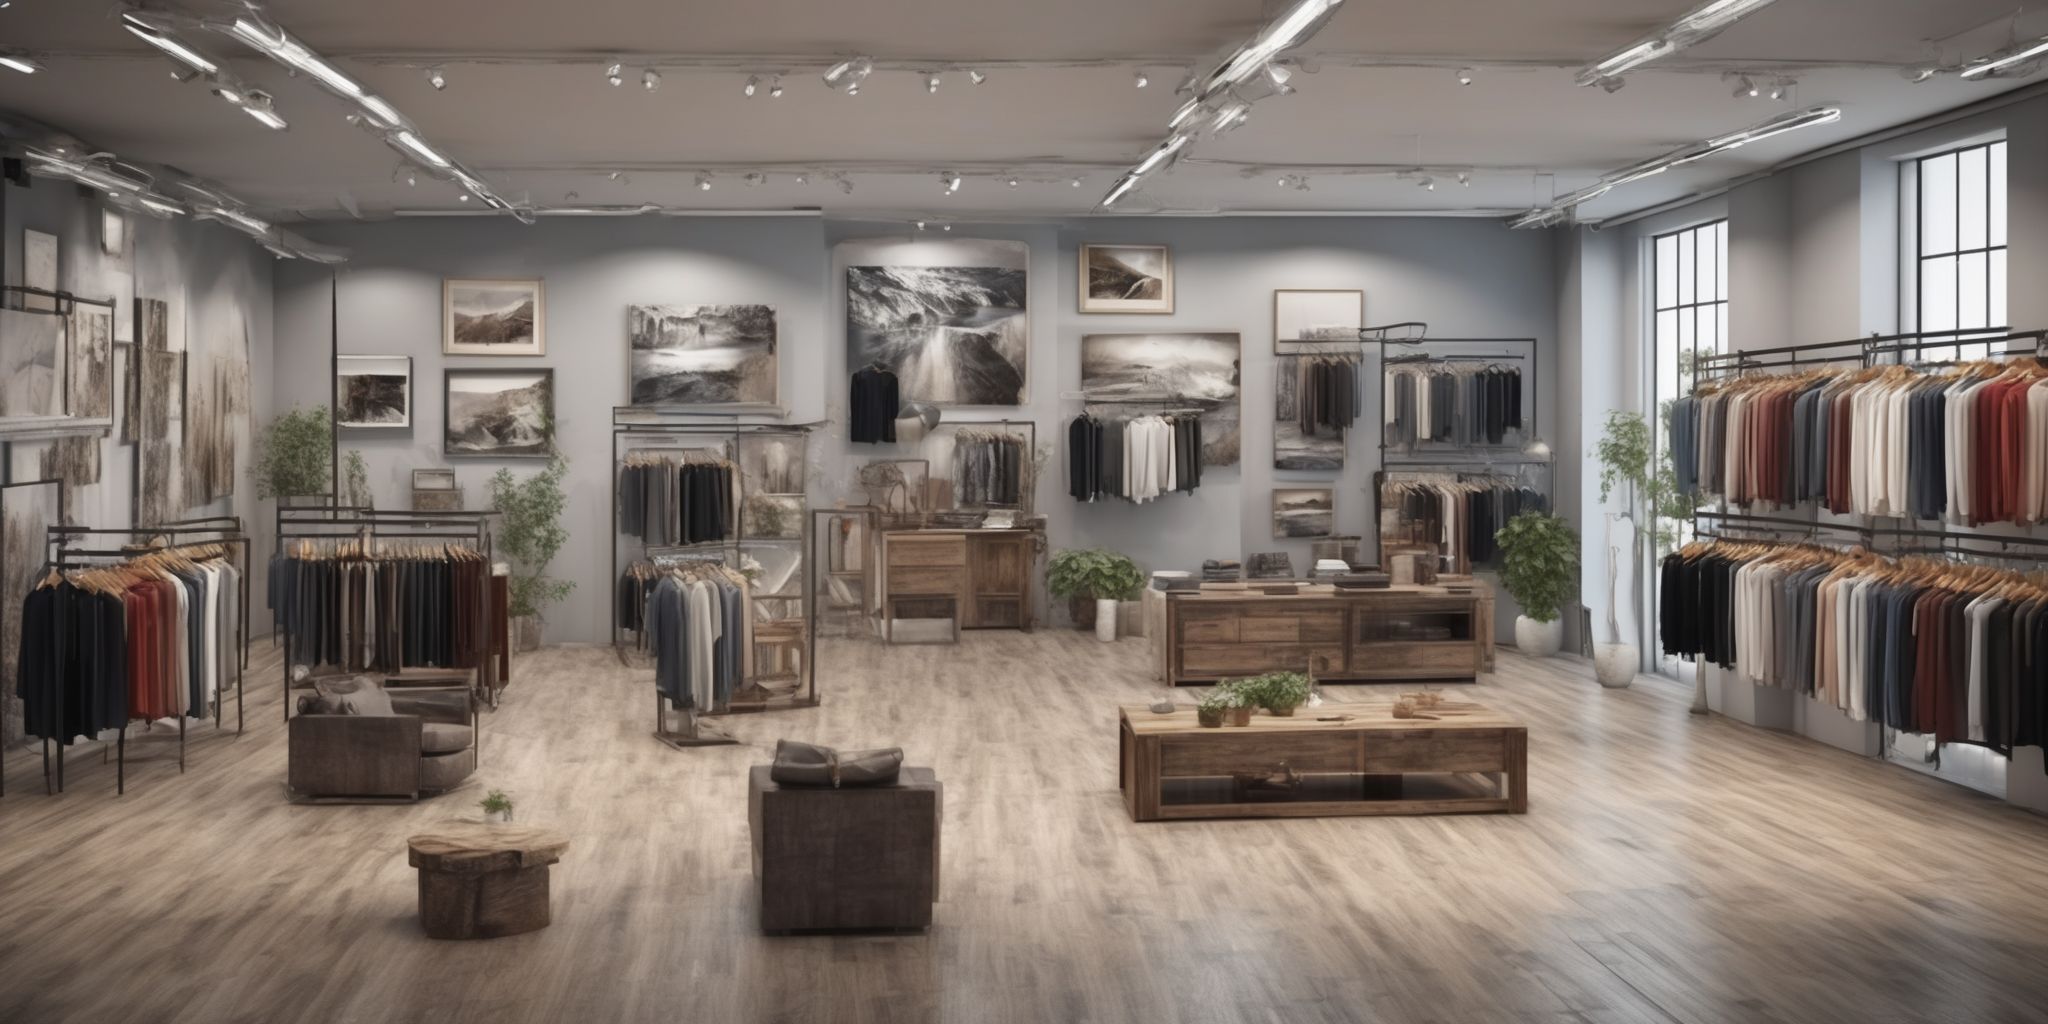 Showroom  in realistic, photographic style